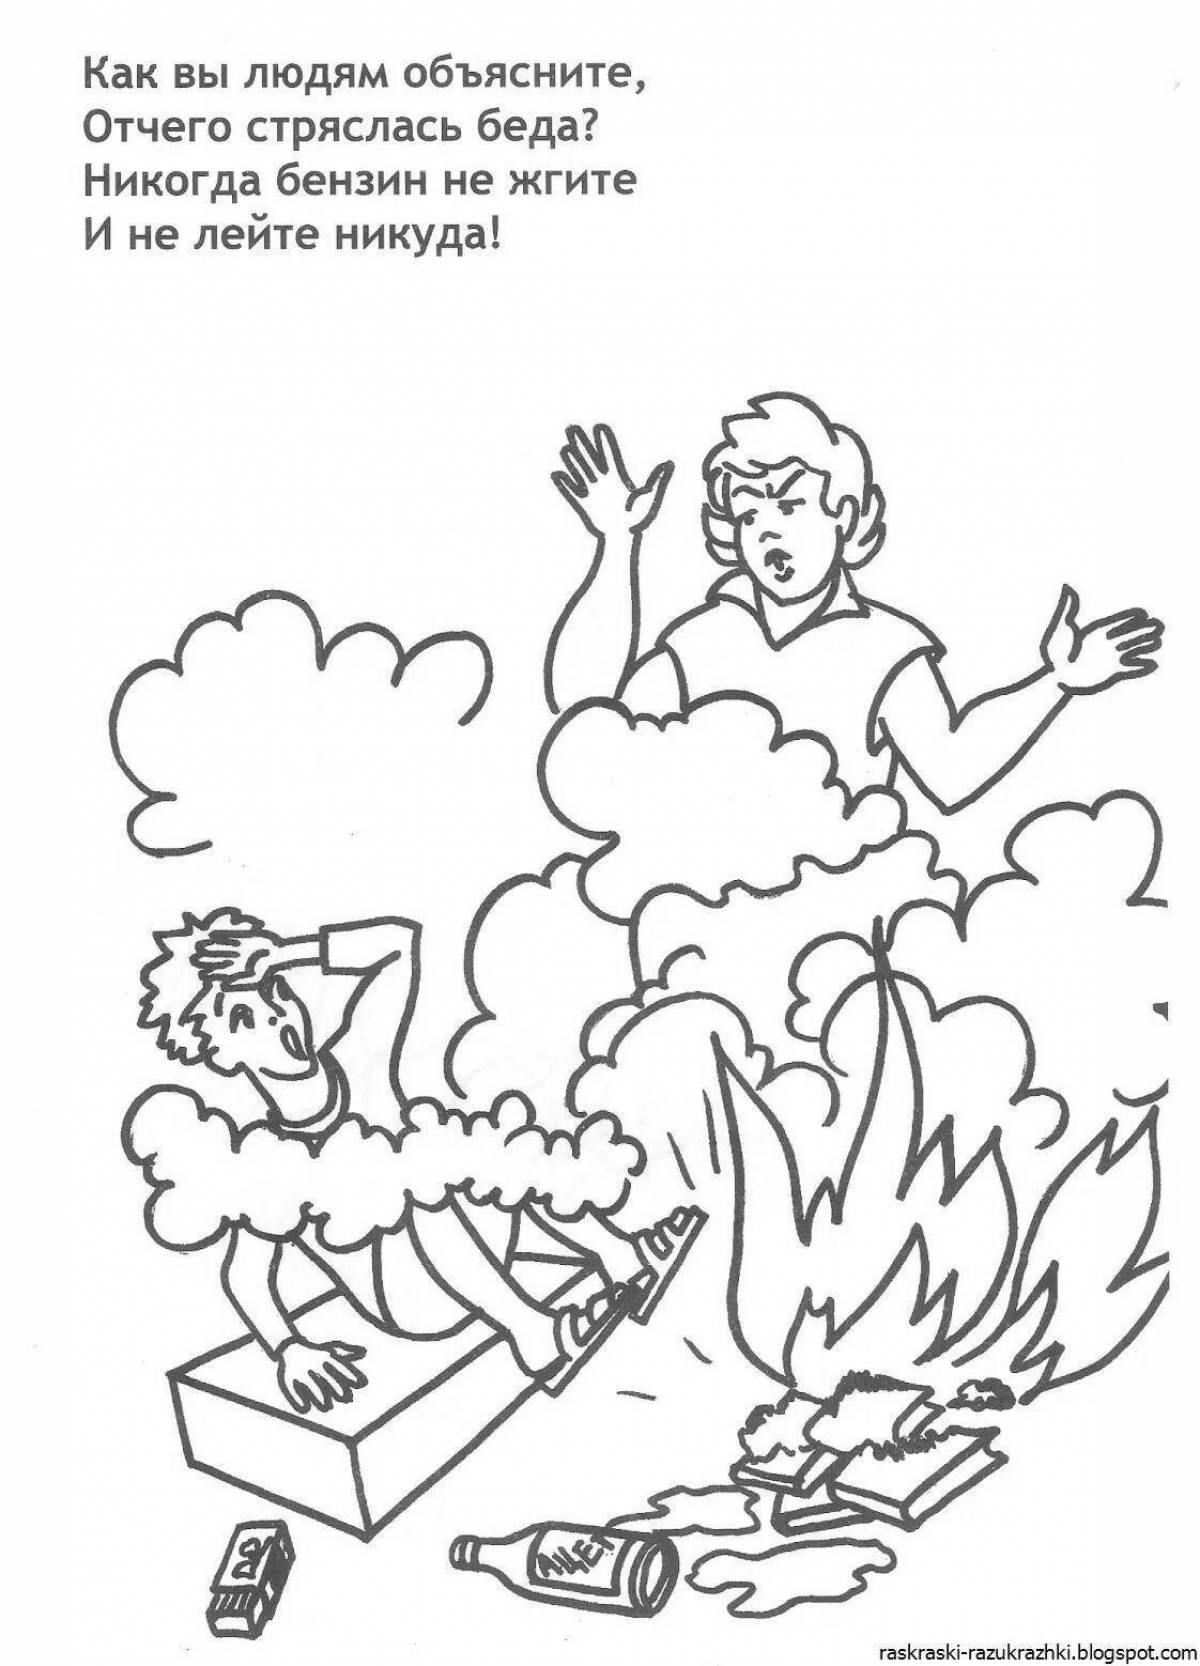 Coloring book funny fire safety tips